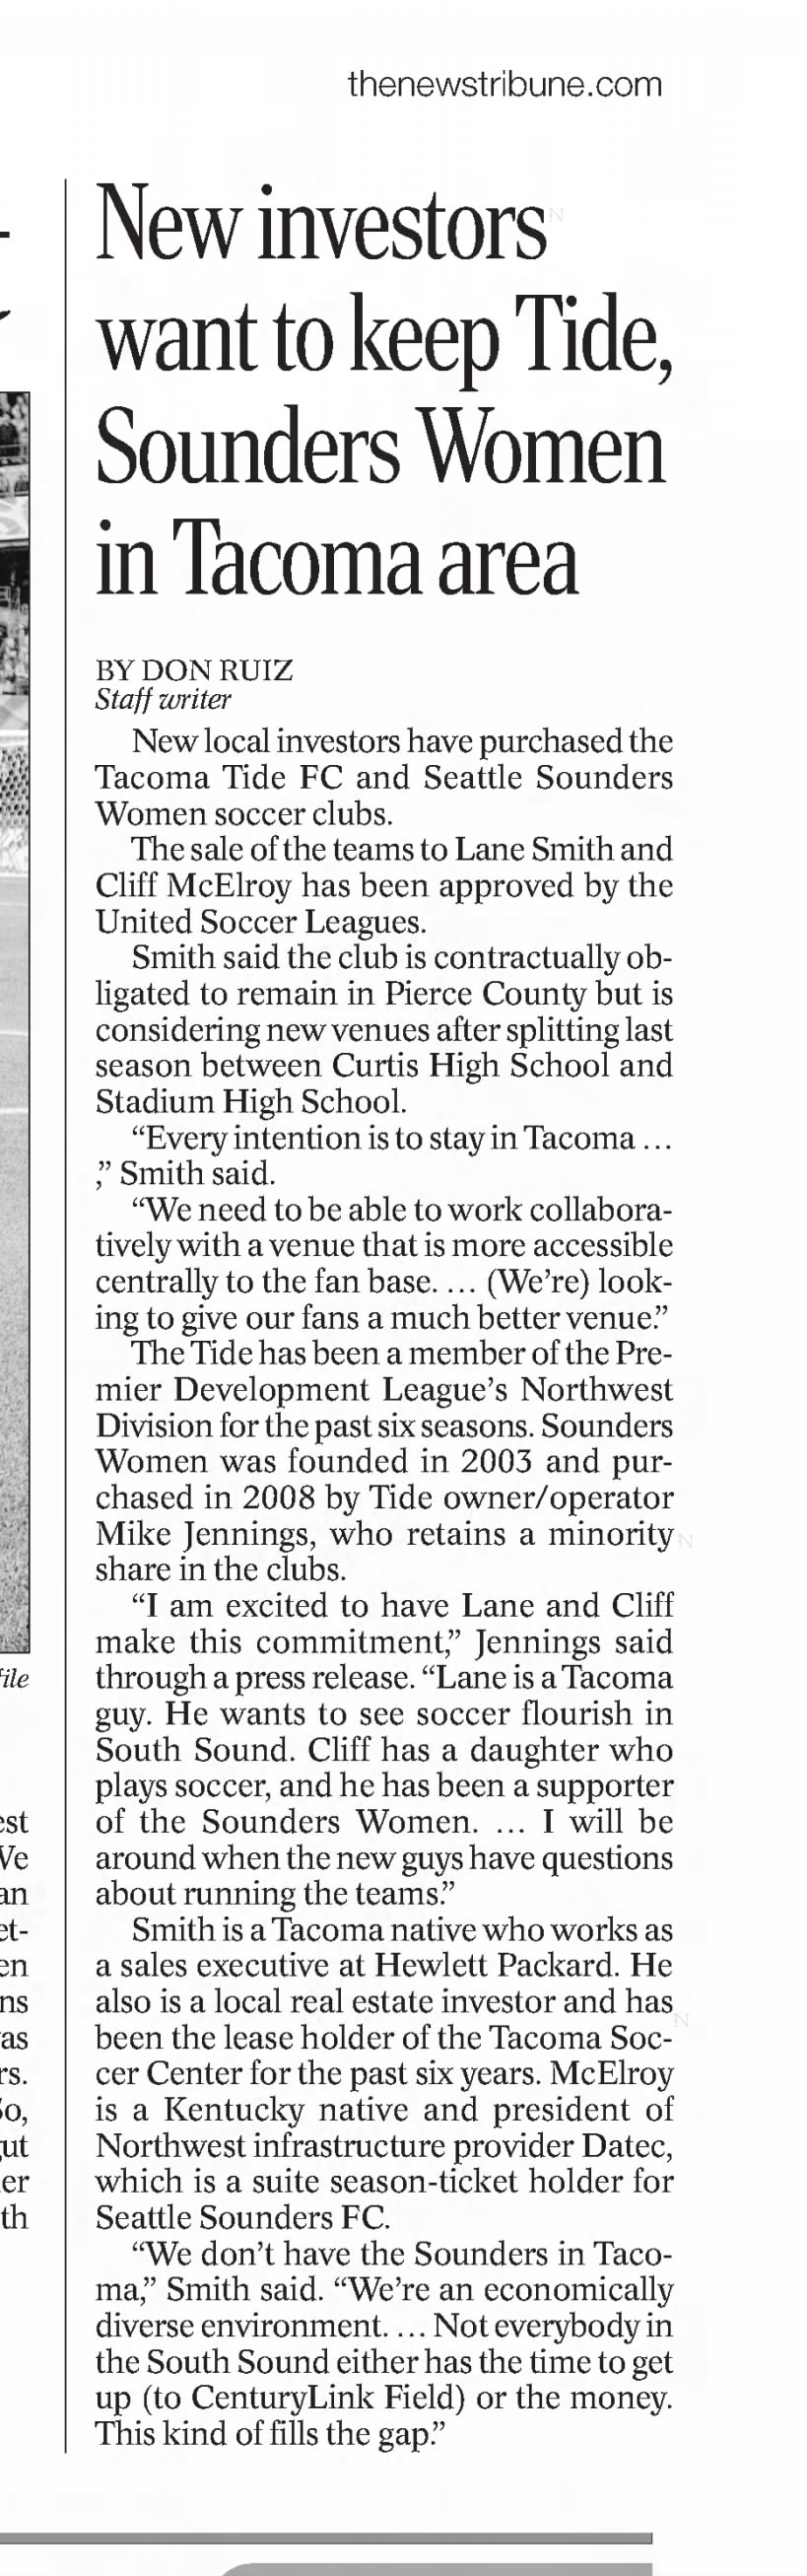 New investors want to keep Tide, Sounders Women in Tacoma area